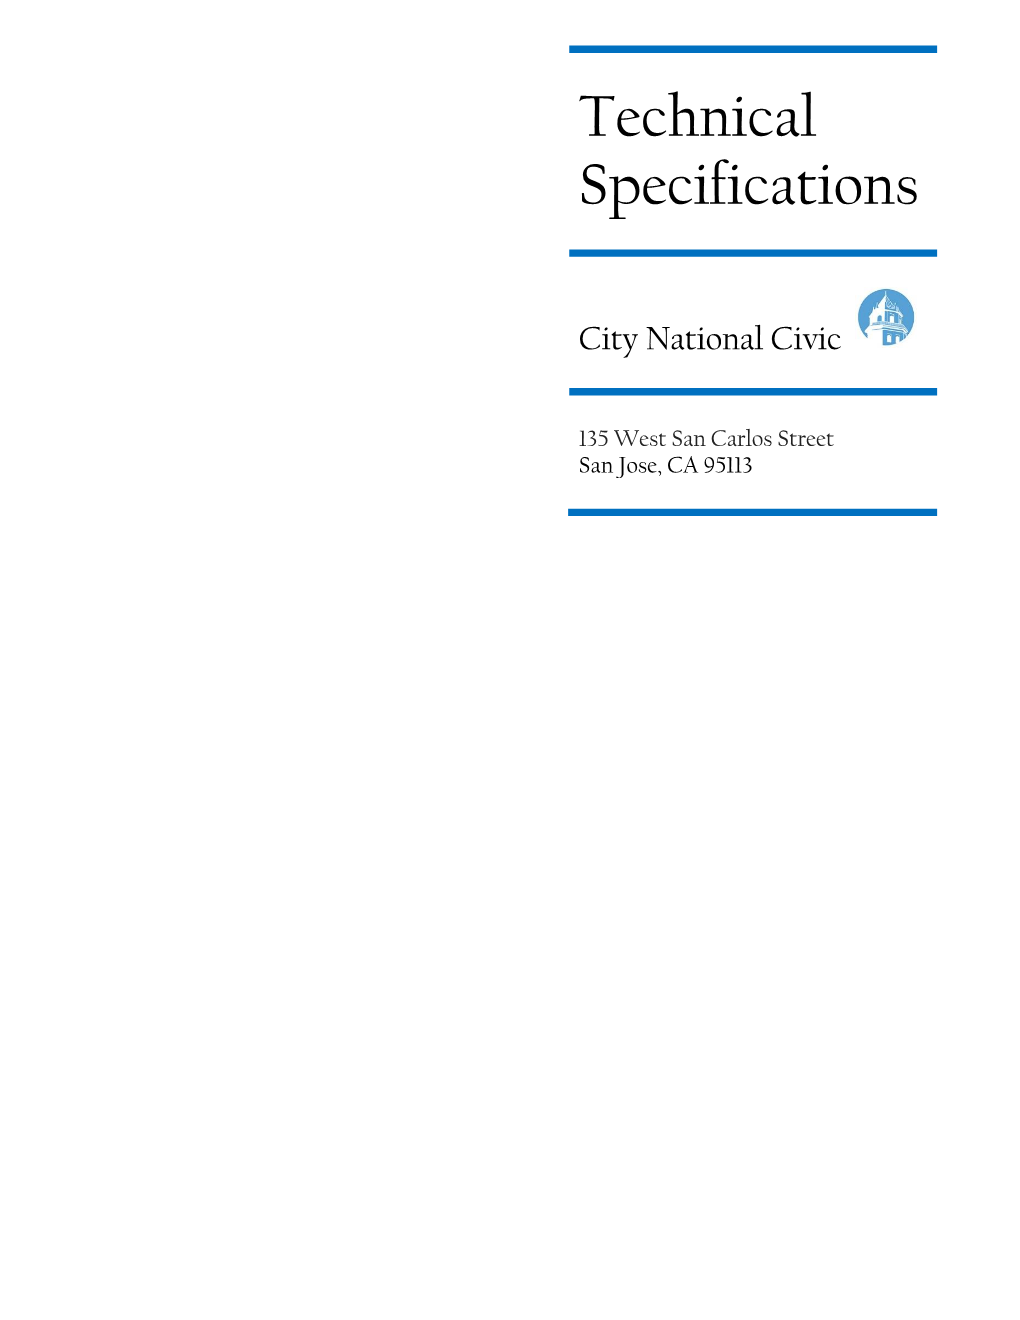 Technical Specifications of the City National Civic